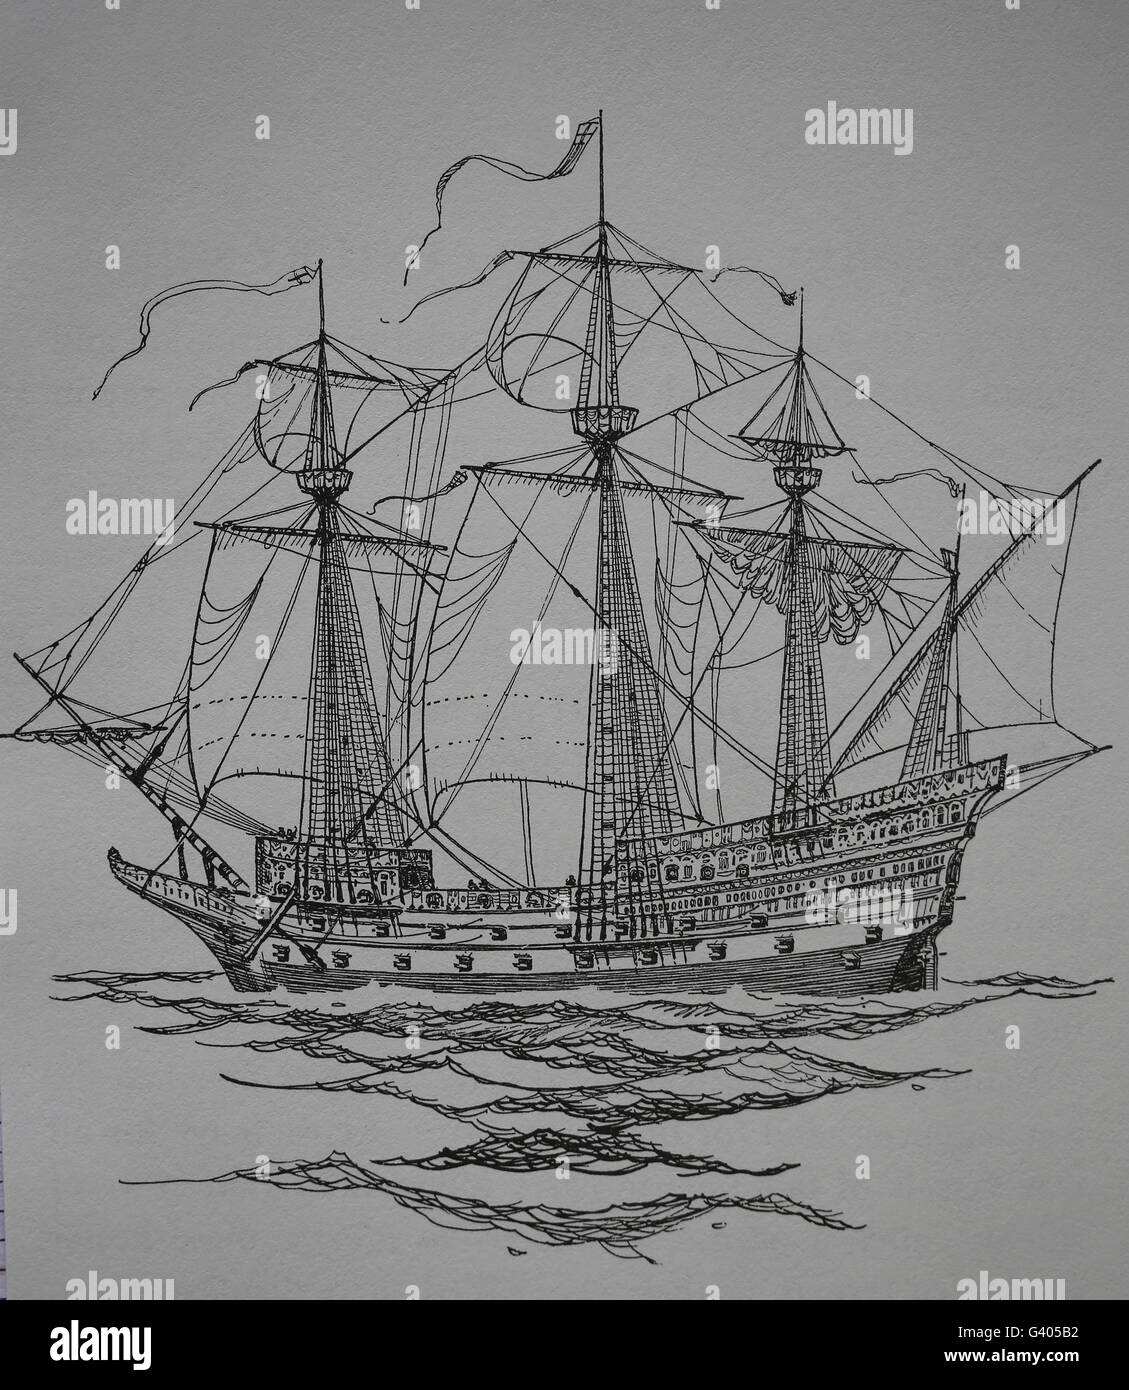 An early 16th century ship. Modern age. Europe. Engraving, 19th century. Stock Photo